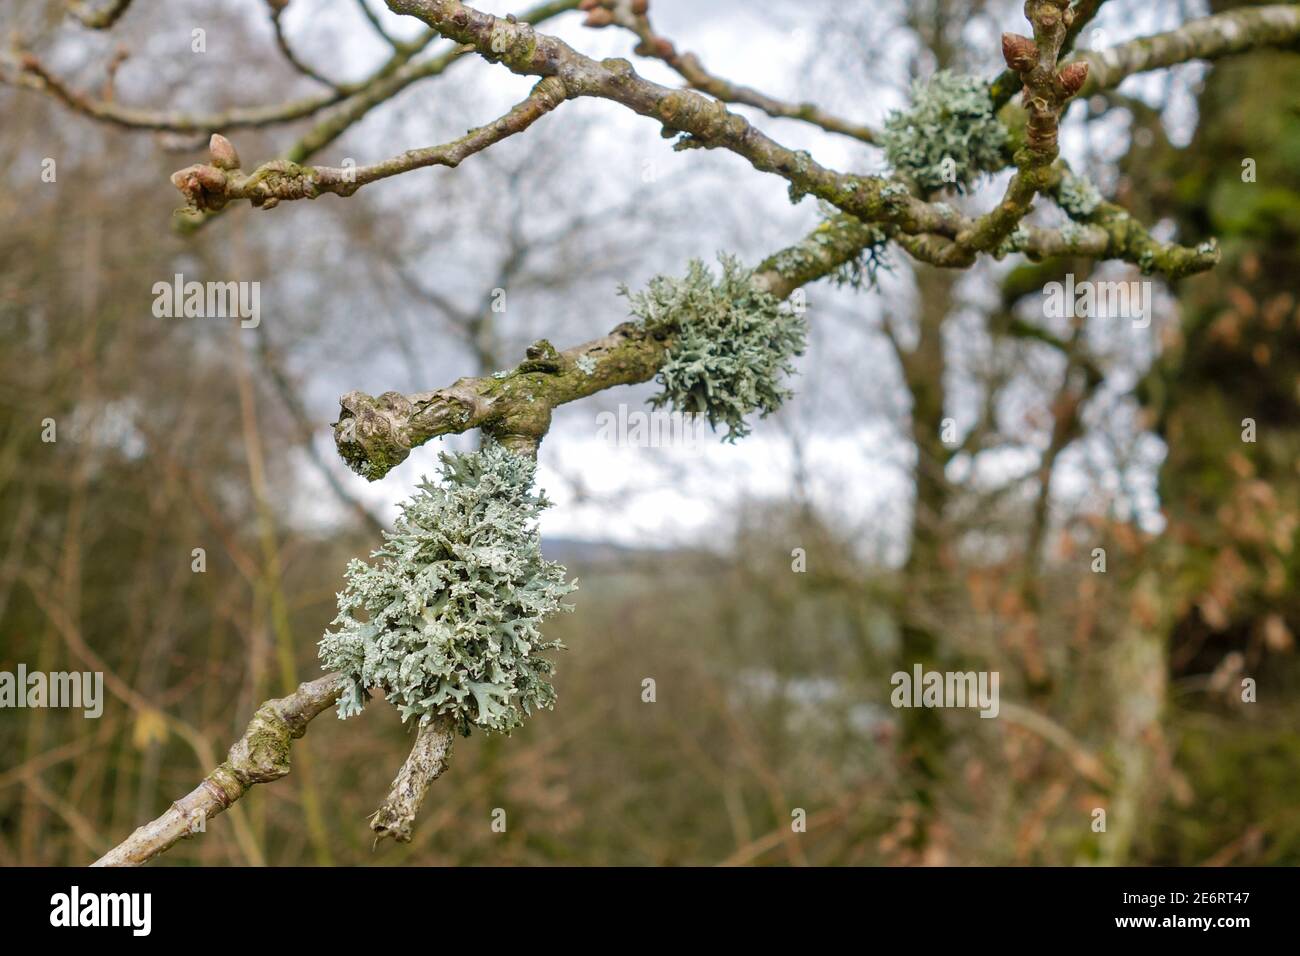 Evernia prunastri, also known as oakmoss, is a species of lichen, England, UK Stock Photo